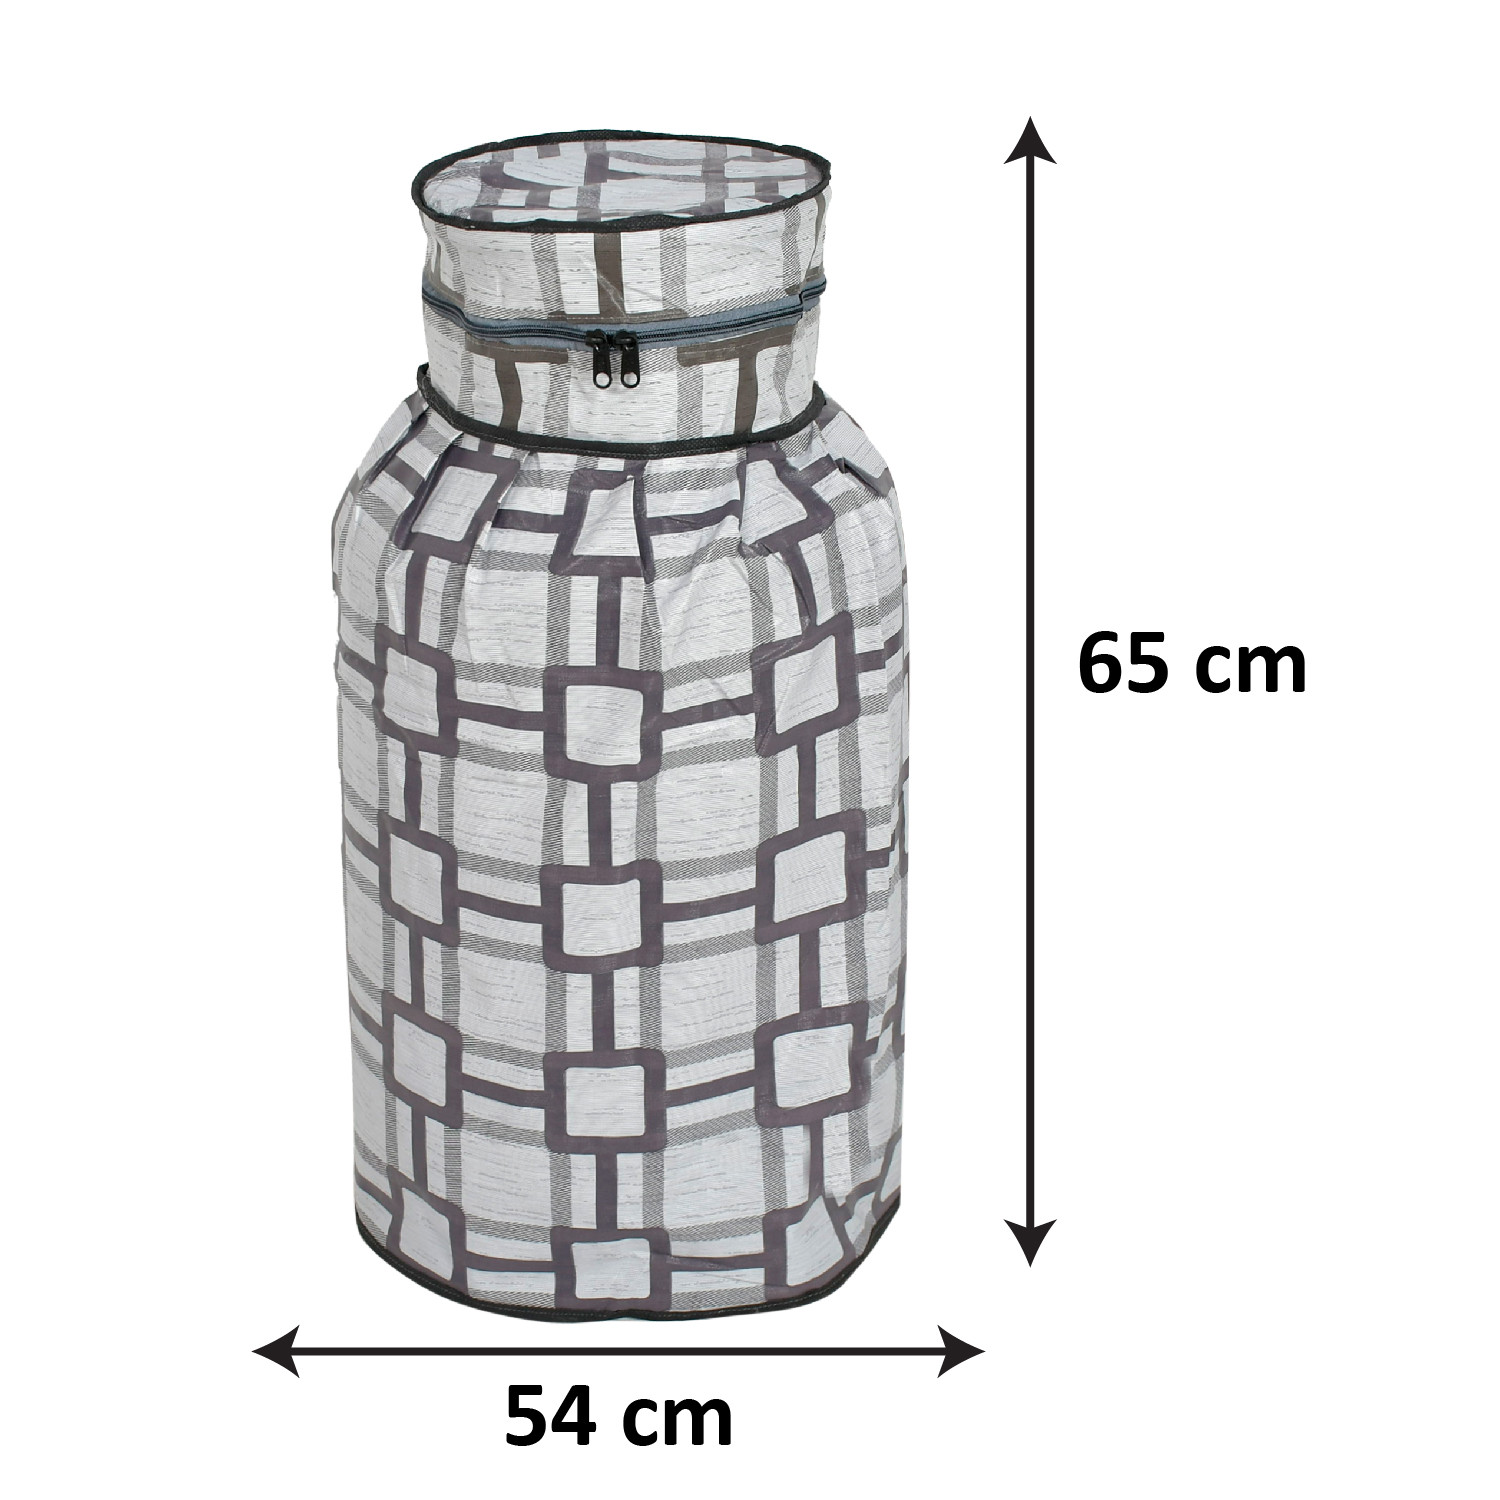 Kuber Industries Square Printed PVC Lpg Gas Cylinder Cover- Pack of 2 (Grey)-HS43KUBMART25627, Standard